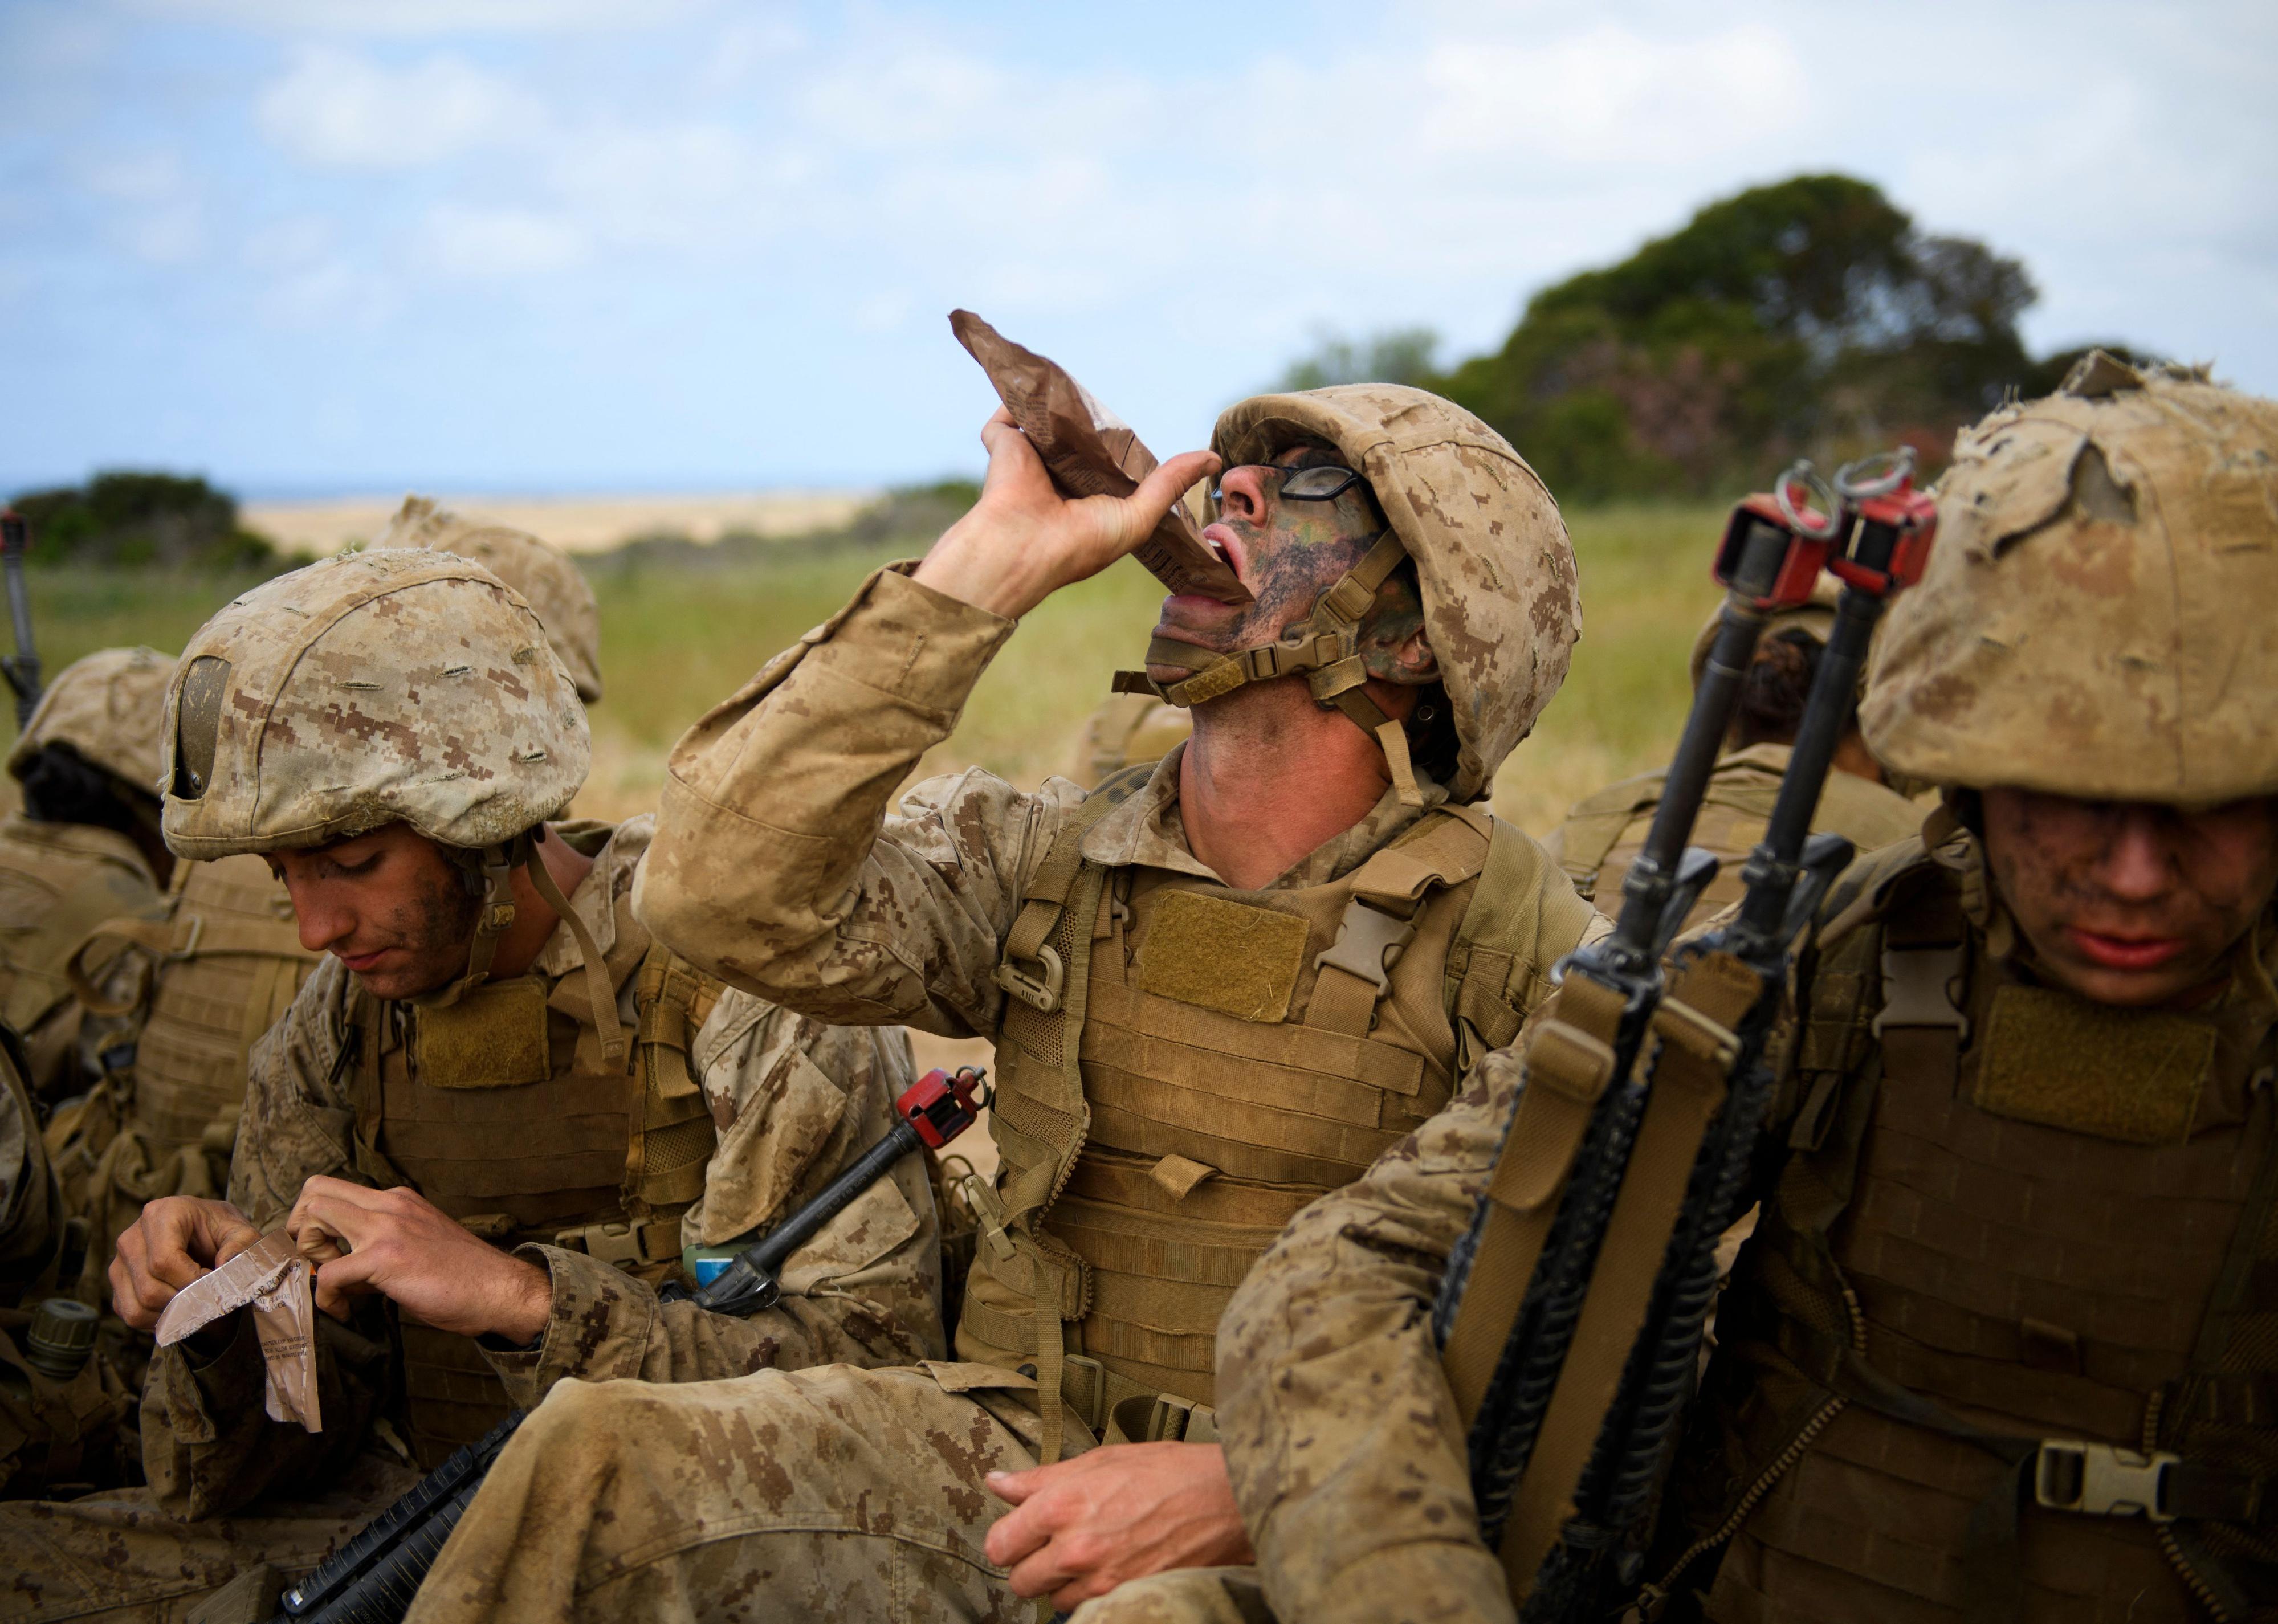 Marines eating MRE's out of the bag.